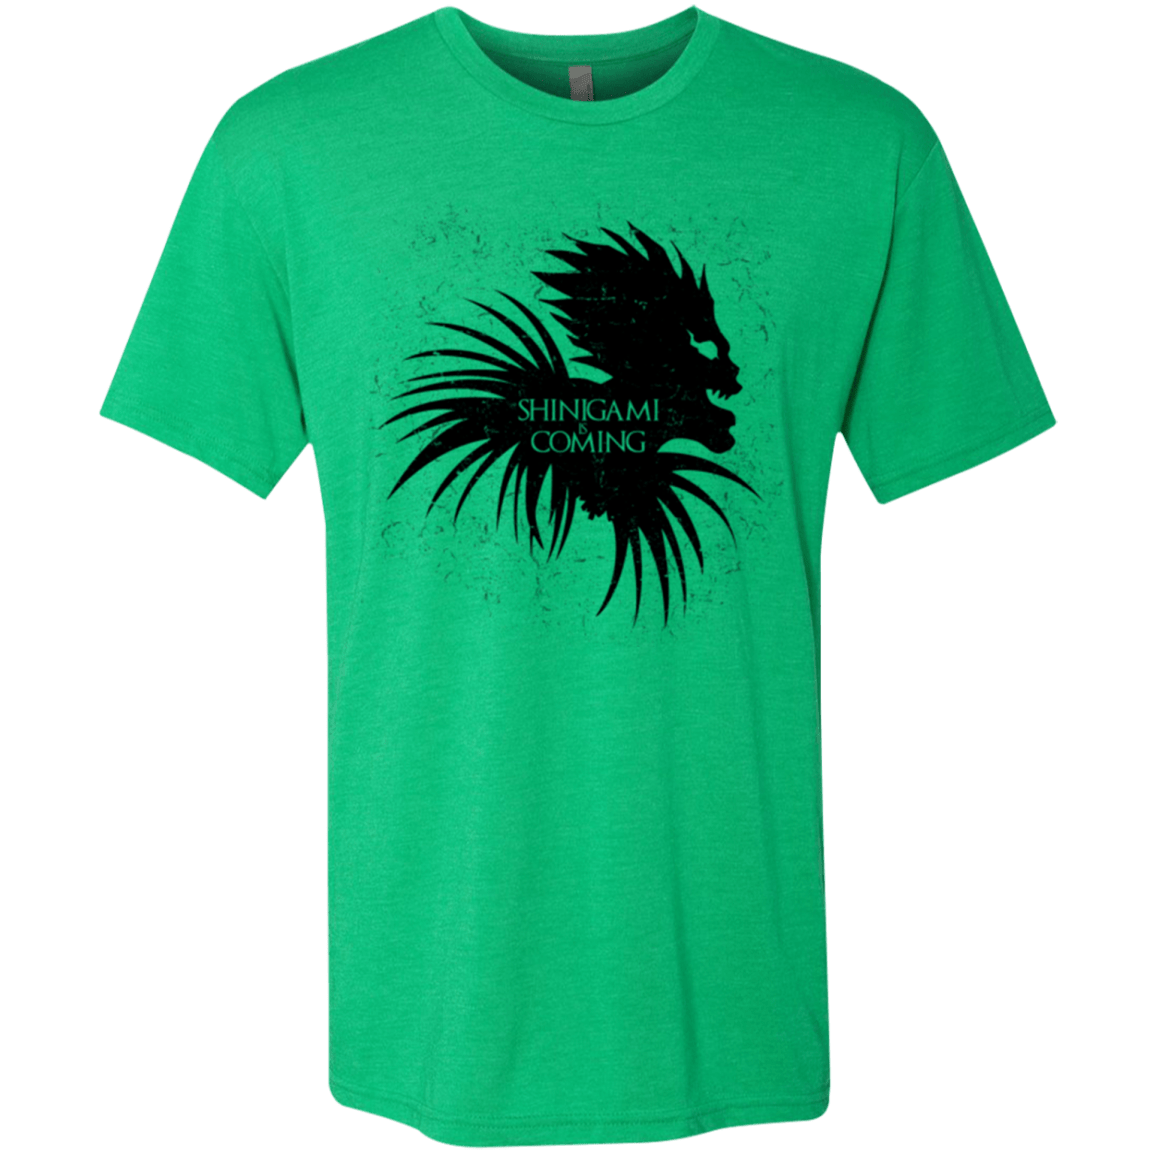 T-Shirts Envy / Small Shinigami Is Coming Men's Triblend T-Shirt